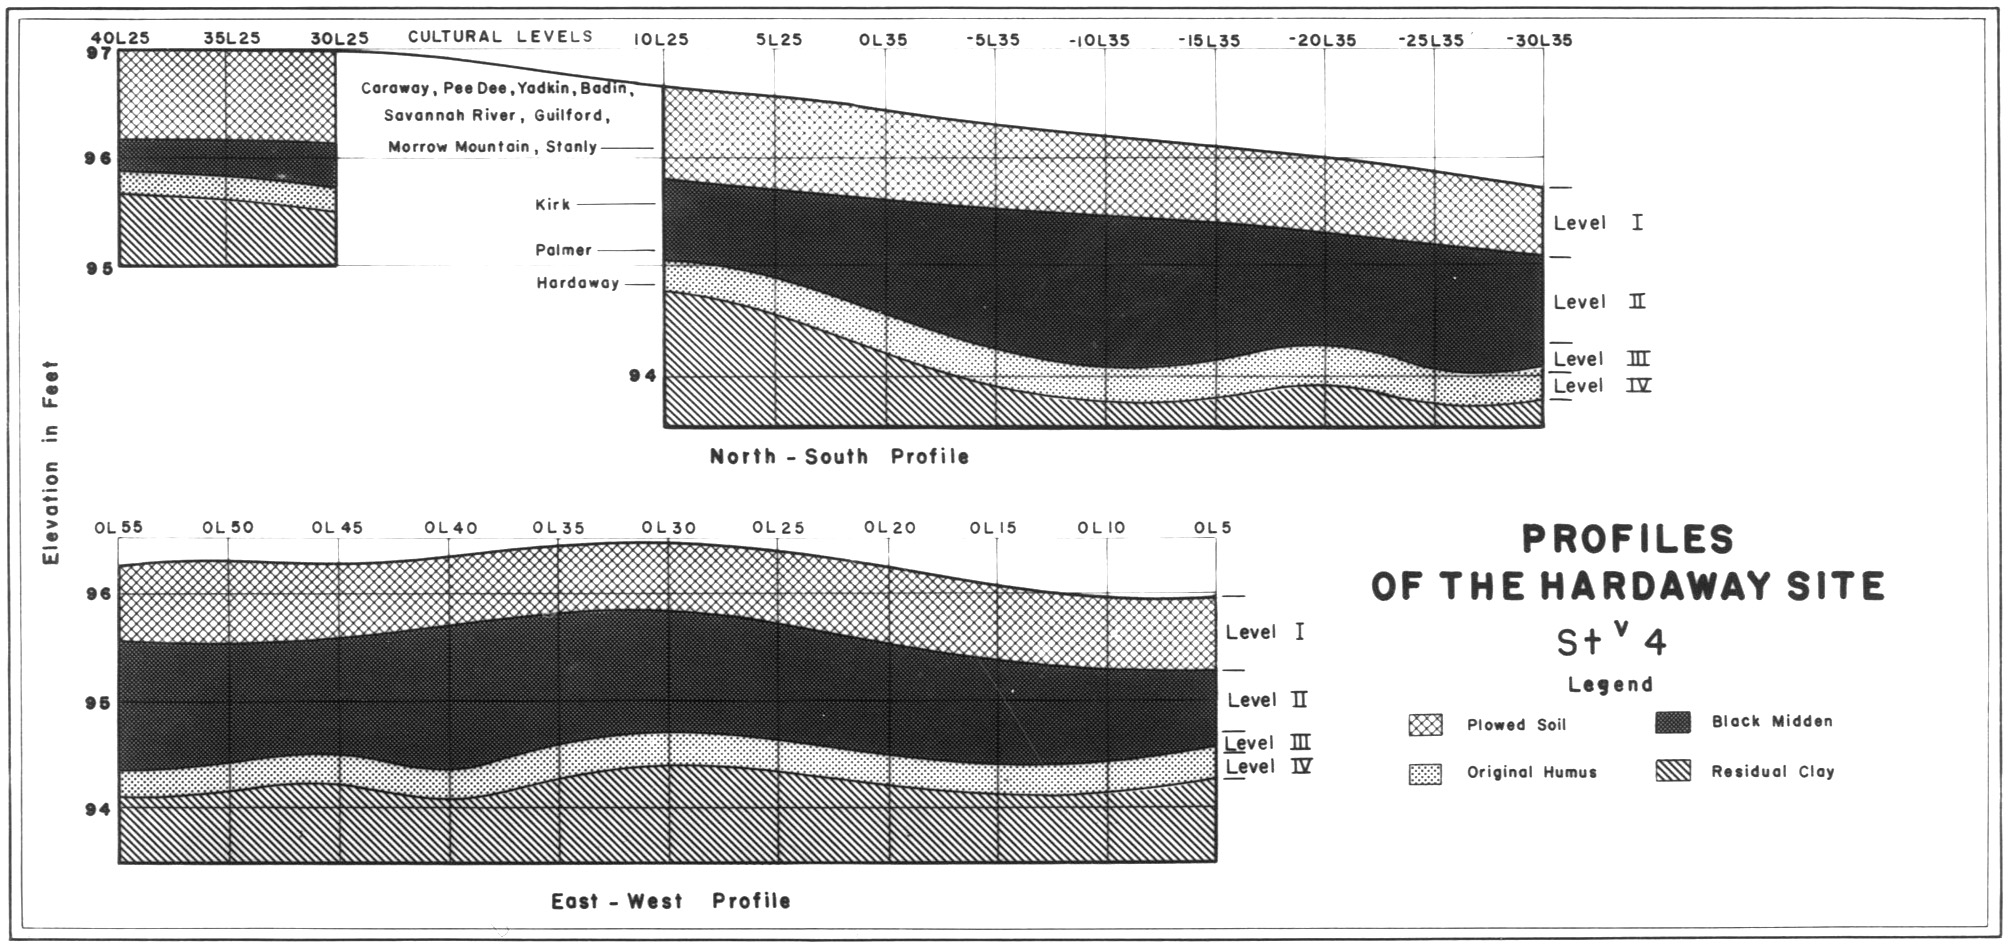 Profiles of the soil layers at Hardaway, from Formative Cultures, Fig. 49 (1964)